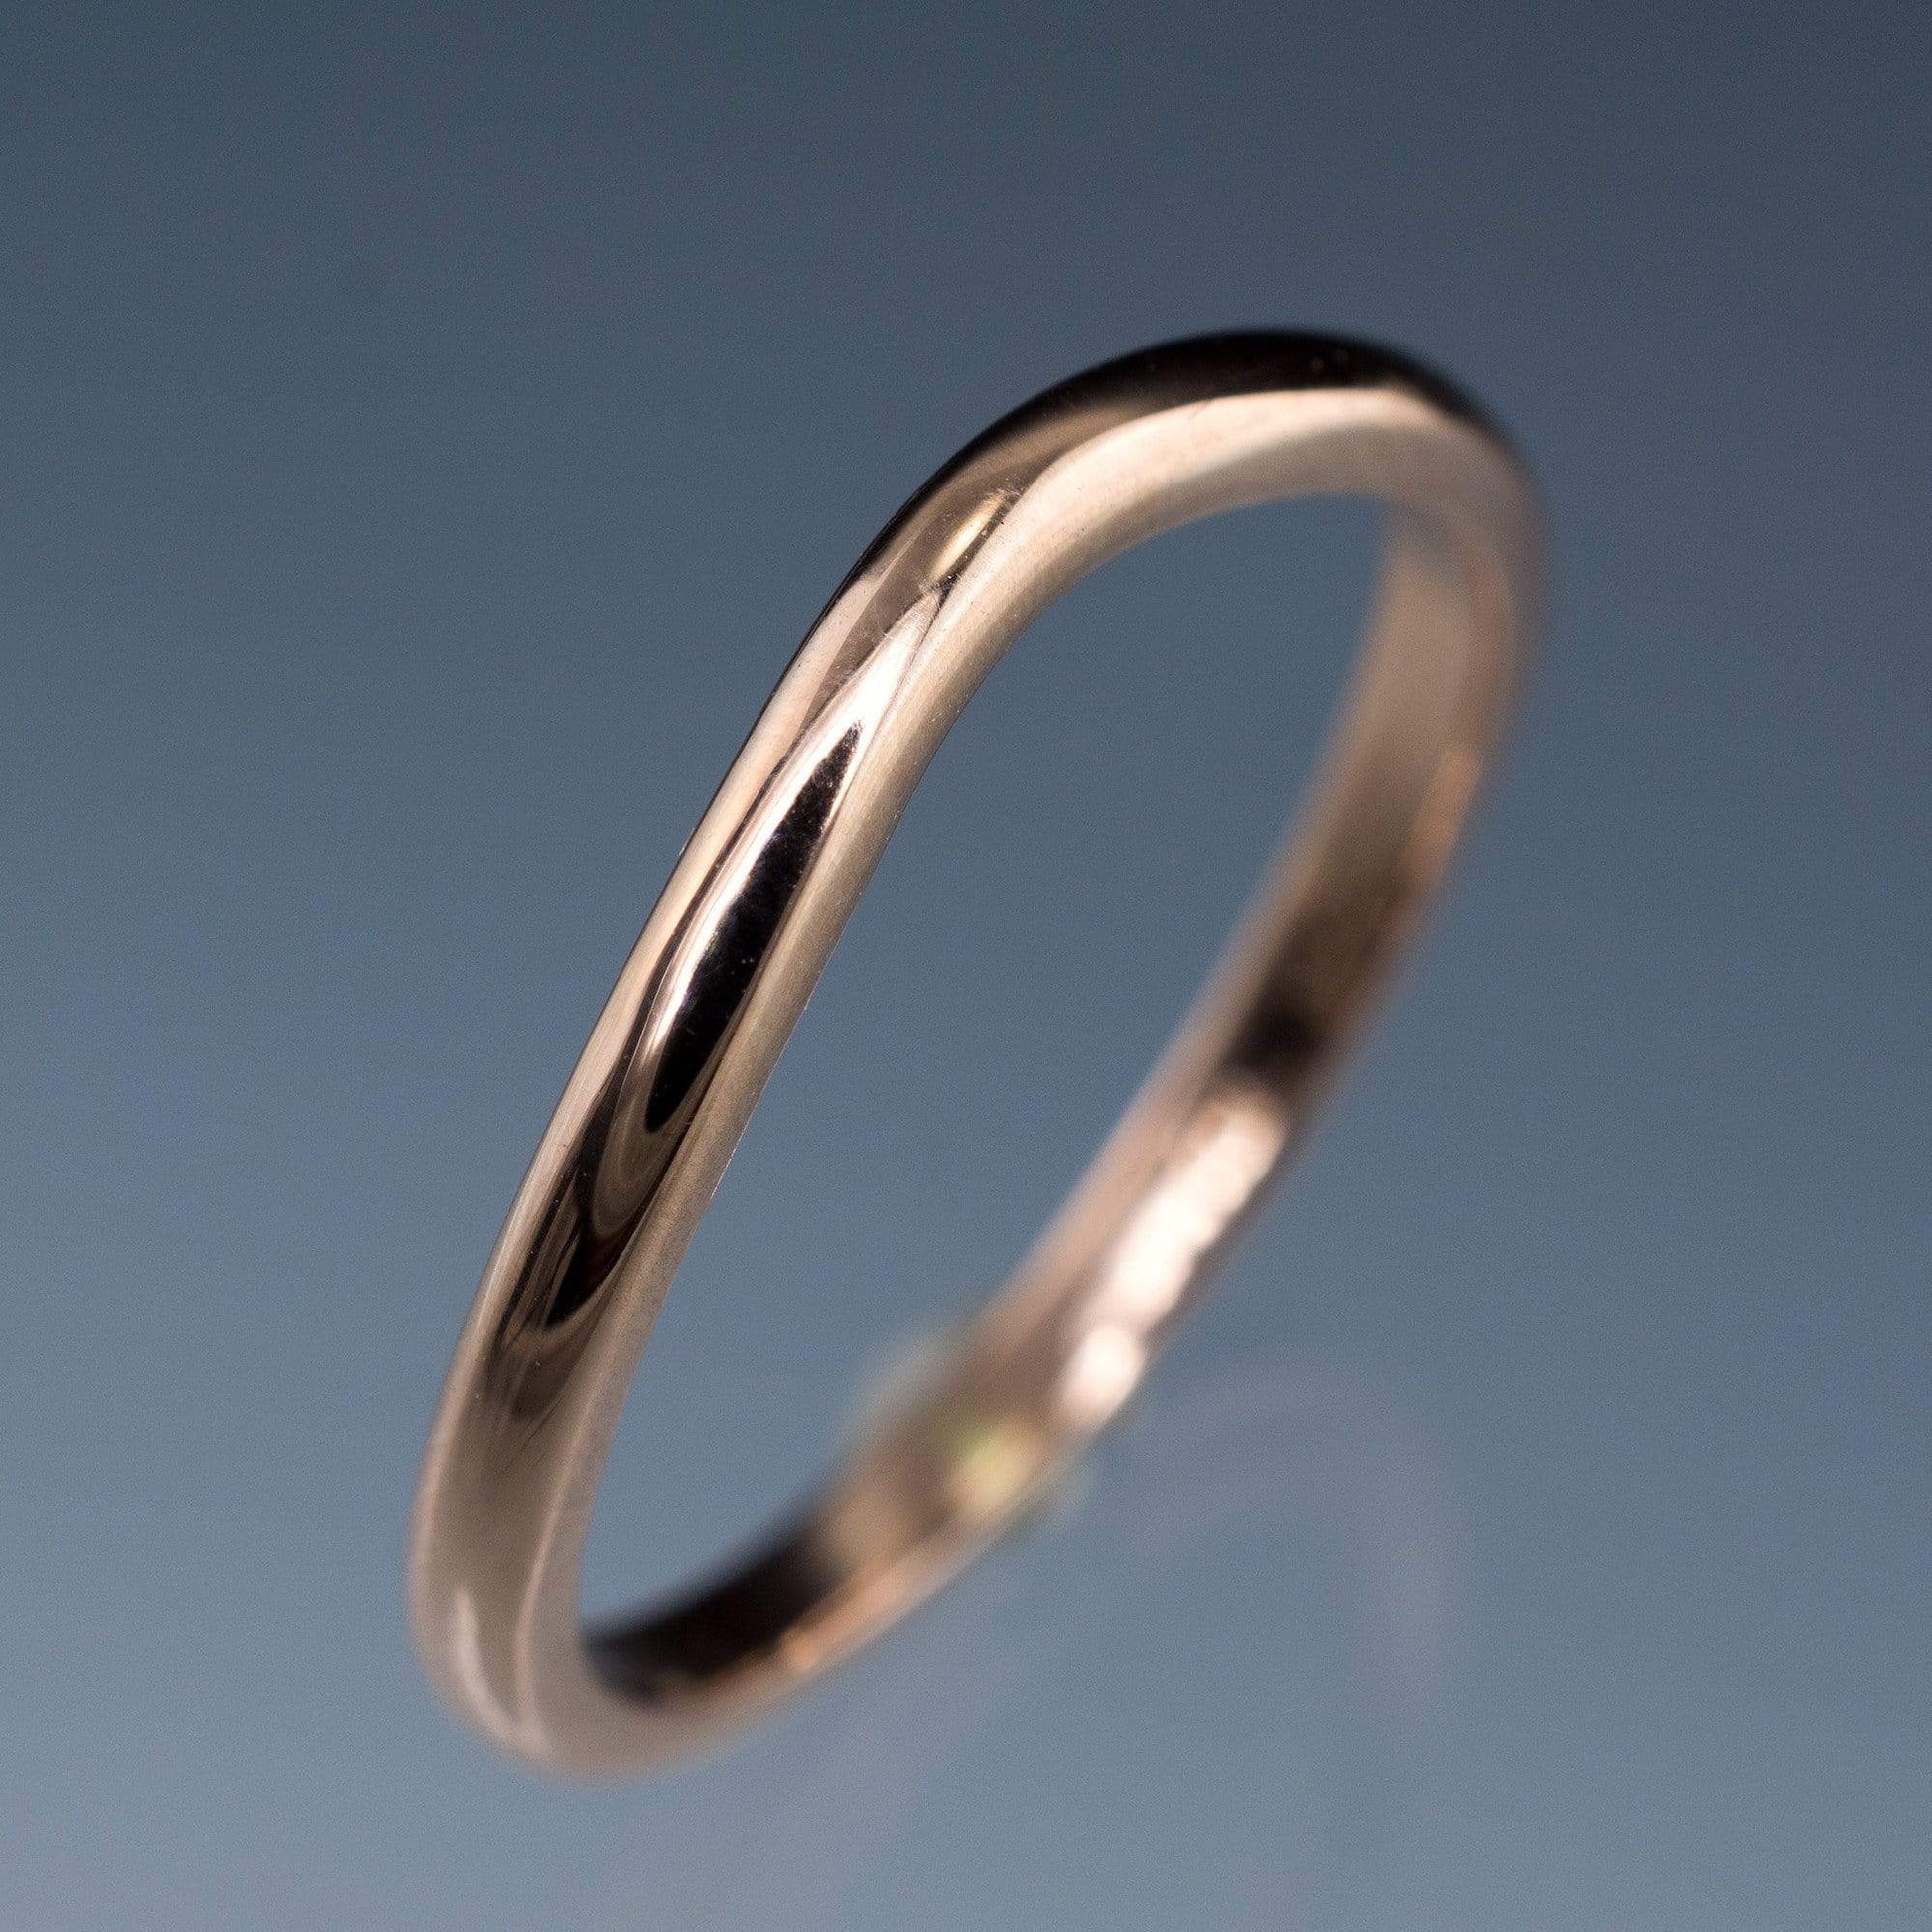 Fitted Contoured Wedding Shadow Band Ring by Nodeform